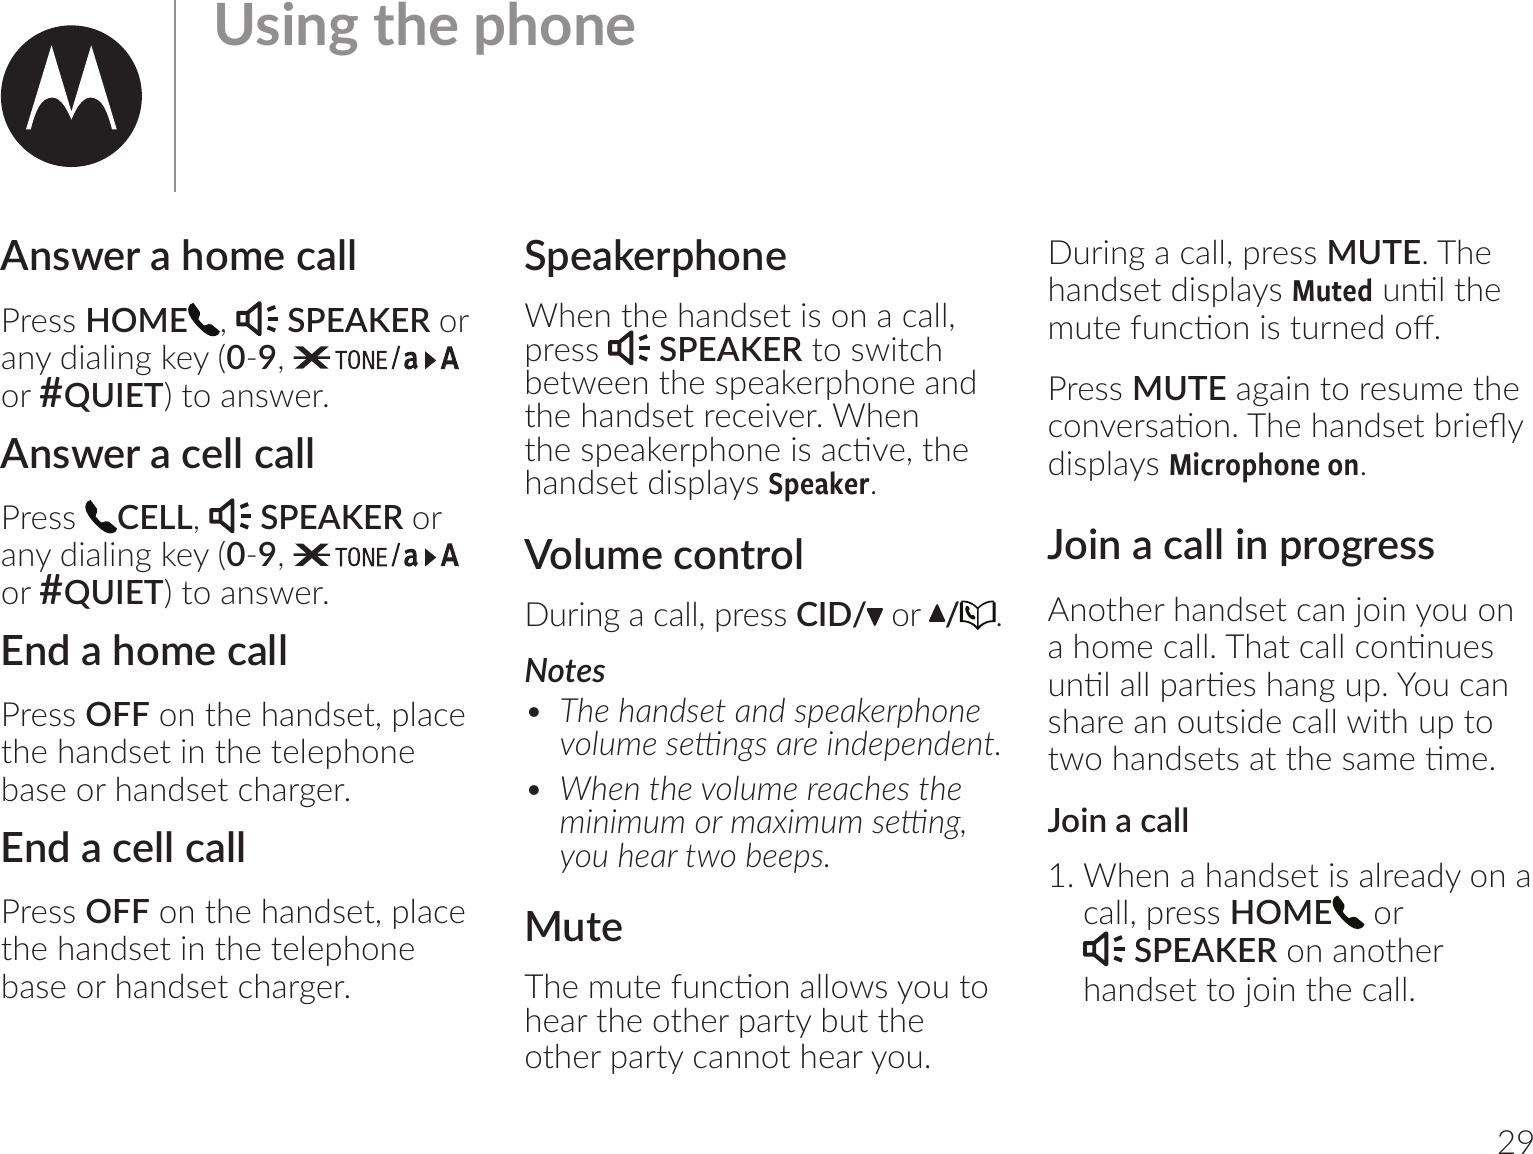 29Answer a home callPress HOME ,   SPEAKER or any dialing key (0-9,   or #QUIET) to answer.Answer a cell callPress  CELL,   SPEAKER or any dialing key (0-9,   or #QUIET) to answer.End a home callPress OFF on the handset, place the handset in the telephone base or handset charger.End a cell callPress OFF on the handset, place the handset in the telephone base or handset charger. SpeakerphoneWhen the handset is on a call, press   SPEAKER to switch between the speakerphone and the handset receiver. When |_;vr;-h;ur_om;bv-1ঞ;ķ|_;handset displays Speaker.Volume controlDuring a call, press CID/  or  /.Notes•  $_;_-m7v;|-m7vr;-h;ur_om;oѲl;v;࣌m]v-u;bm7;r;m7;m|ĸ•  )_;m|_;oѲl;u;-1_;v|_;lbmblloul-bllv;࣌m]Ķo_;-u|o0;;rvĸMute$_;l|;=m1ঞom-ѴѴovo|ohear the other party but the  other party cannot hear you.During a call, press MUTE. The handset displays MutedmঞѴ|_;l|;=m1ঞombv|um;7o@ĺPress MUTE again to resume the 1om;uv-ঞomĺ$_;_-m7v;|0ub;Ydisplays Microphone on.Join a call in progressAnother handset can join you on -_ol;1-ѴѴĺ$_-|1-ѴѴ1omঞm;vmঞѴ-ѴѴr-uঞ;v_-m]rĺ+o1-mshare an outside call with up to |o_-m7v;|v-||_;v-l;ঞl;ĺJoin a call1. When a handset is already on a call, press HOME  or   SPEAKER on another handset to join the call.  &amp;vbm]|_;r_om;